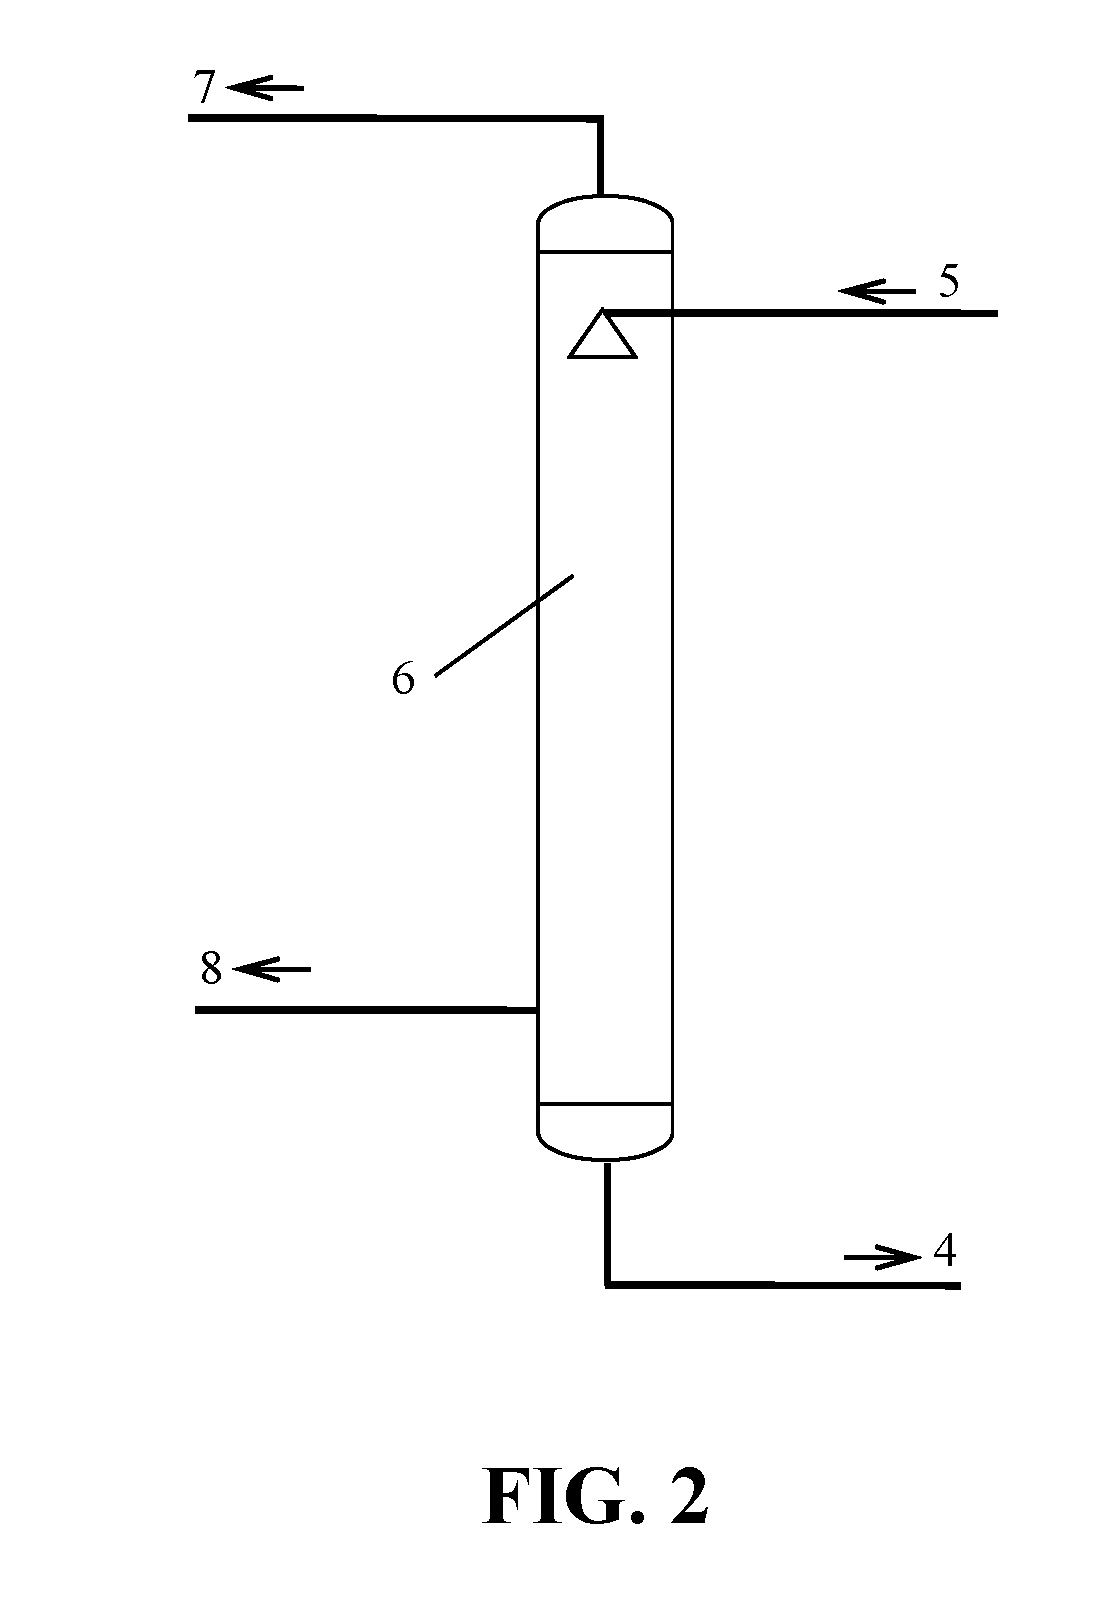 Method for Removing SOx from Gas Using Ethylene Glycol Composite Solution